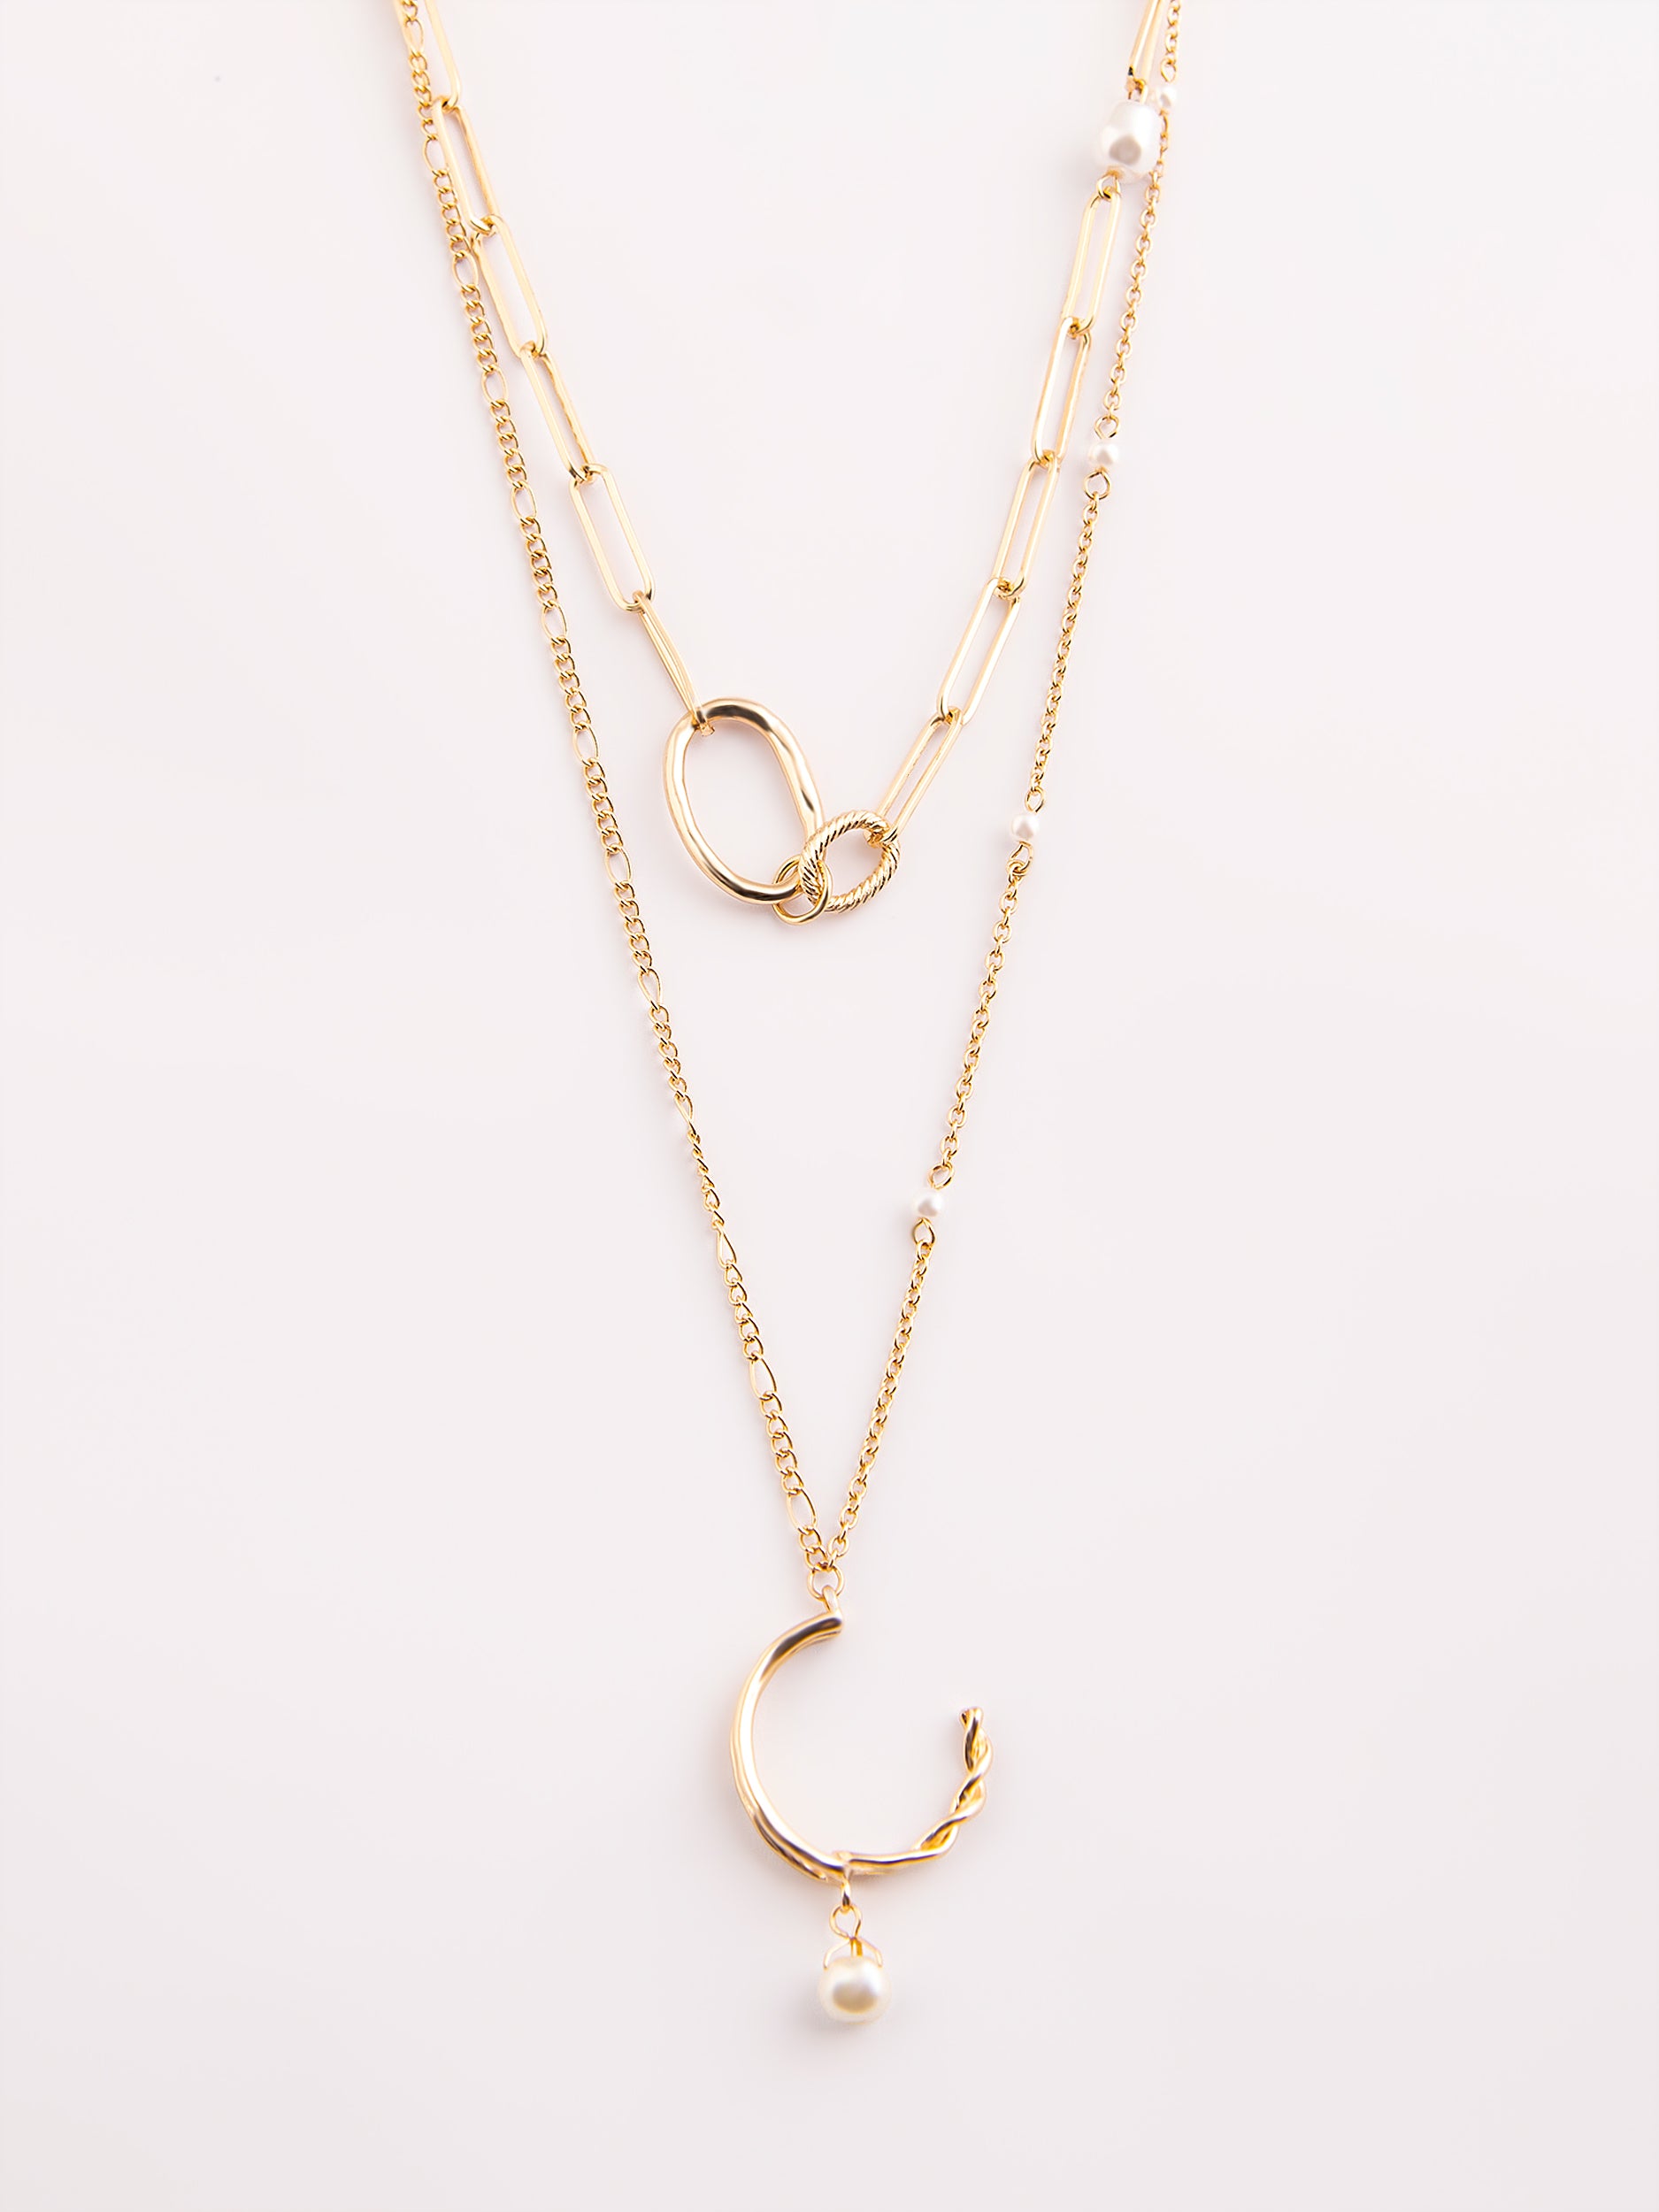 C-Hoop Layered Necklace